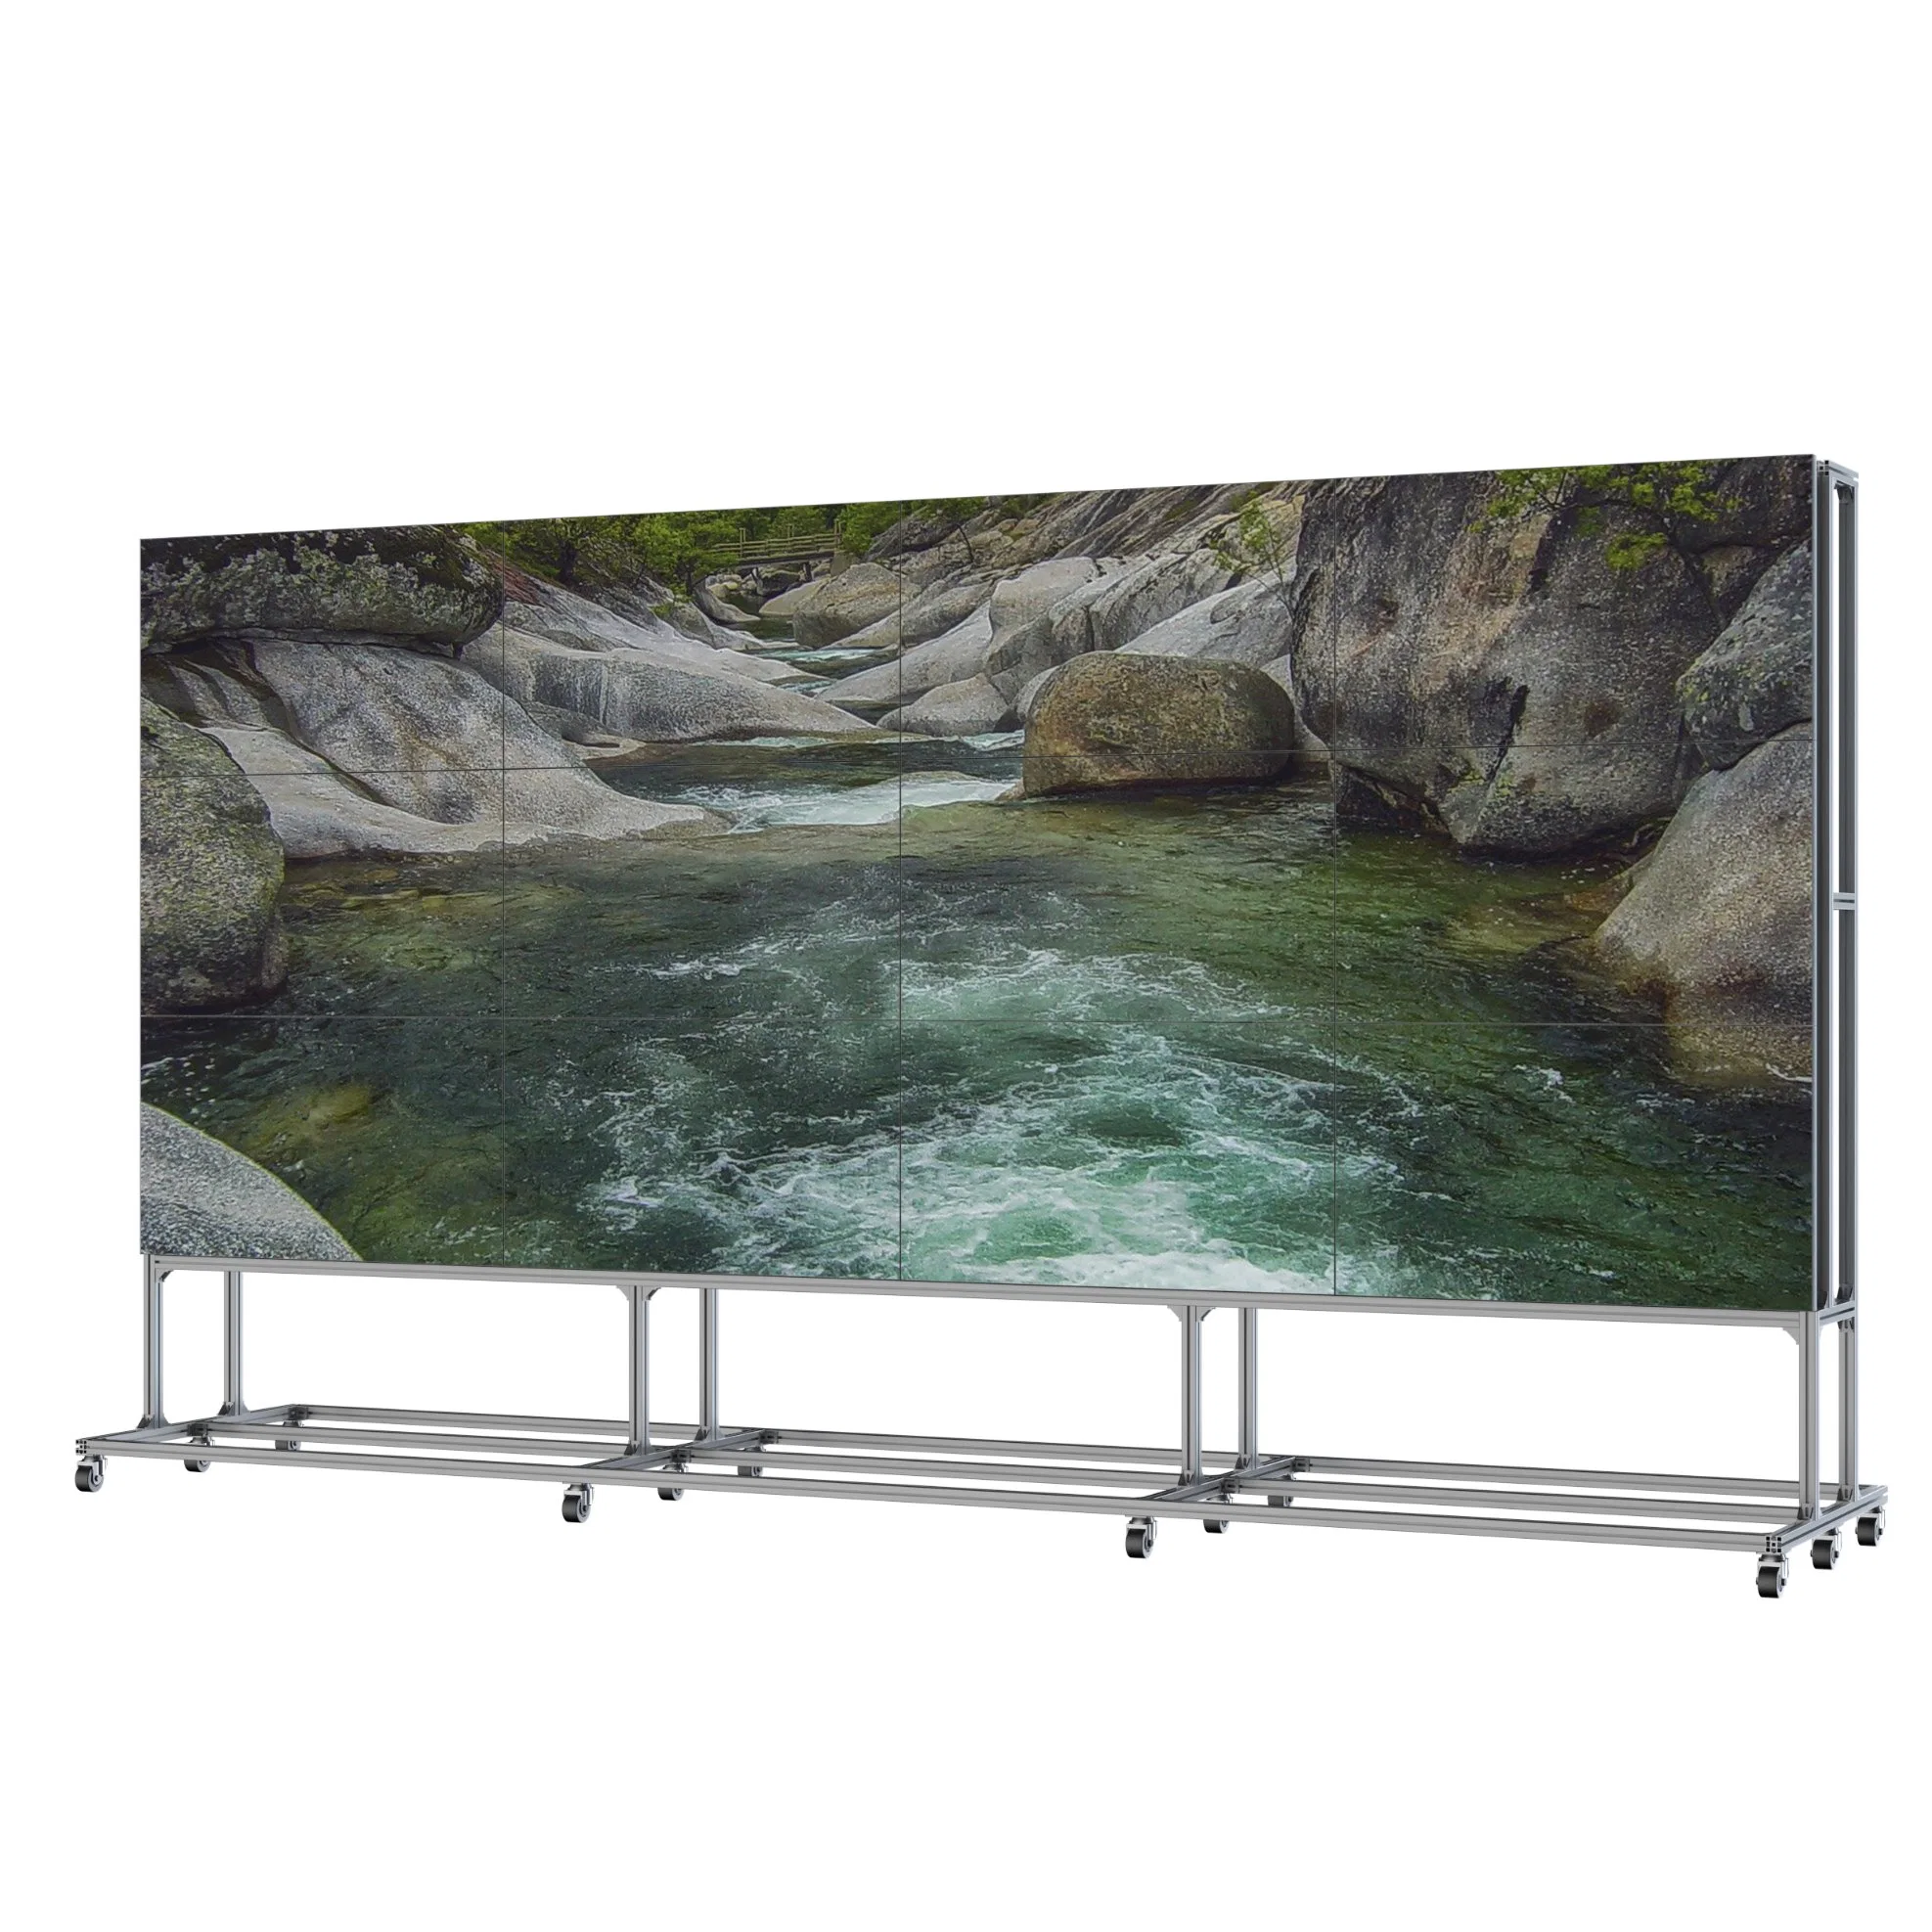 Wall Mount Full Color LED Display Module Zoo Free Indoor Video Wall Full HD 1080P 4K Digital Signage Advertising LCD Panels